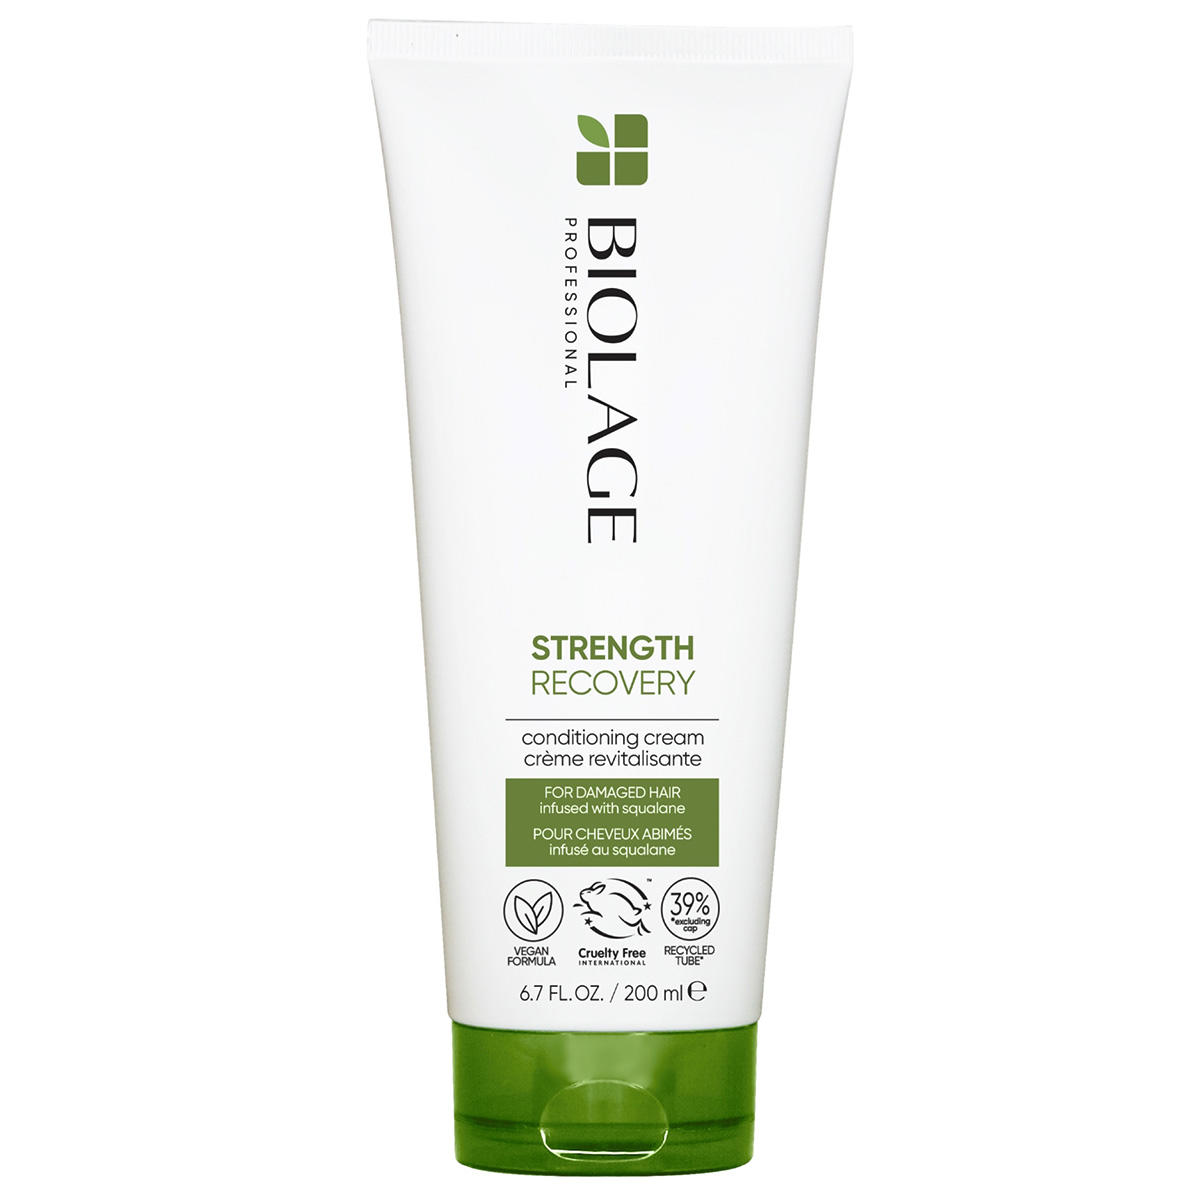 BIOLAGE STRENGTH RECOVERY Conditioning Cream  - 1